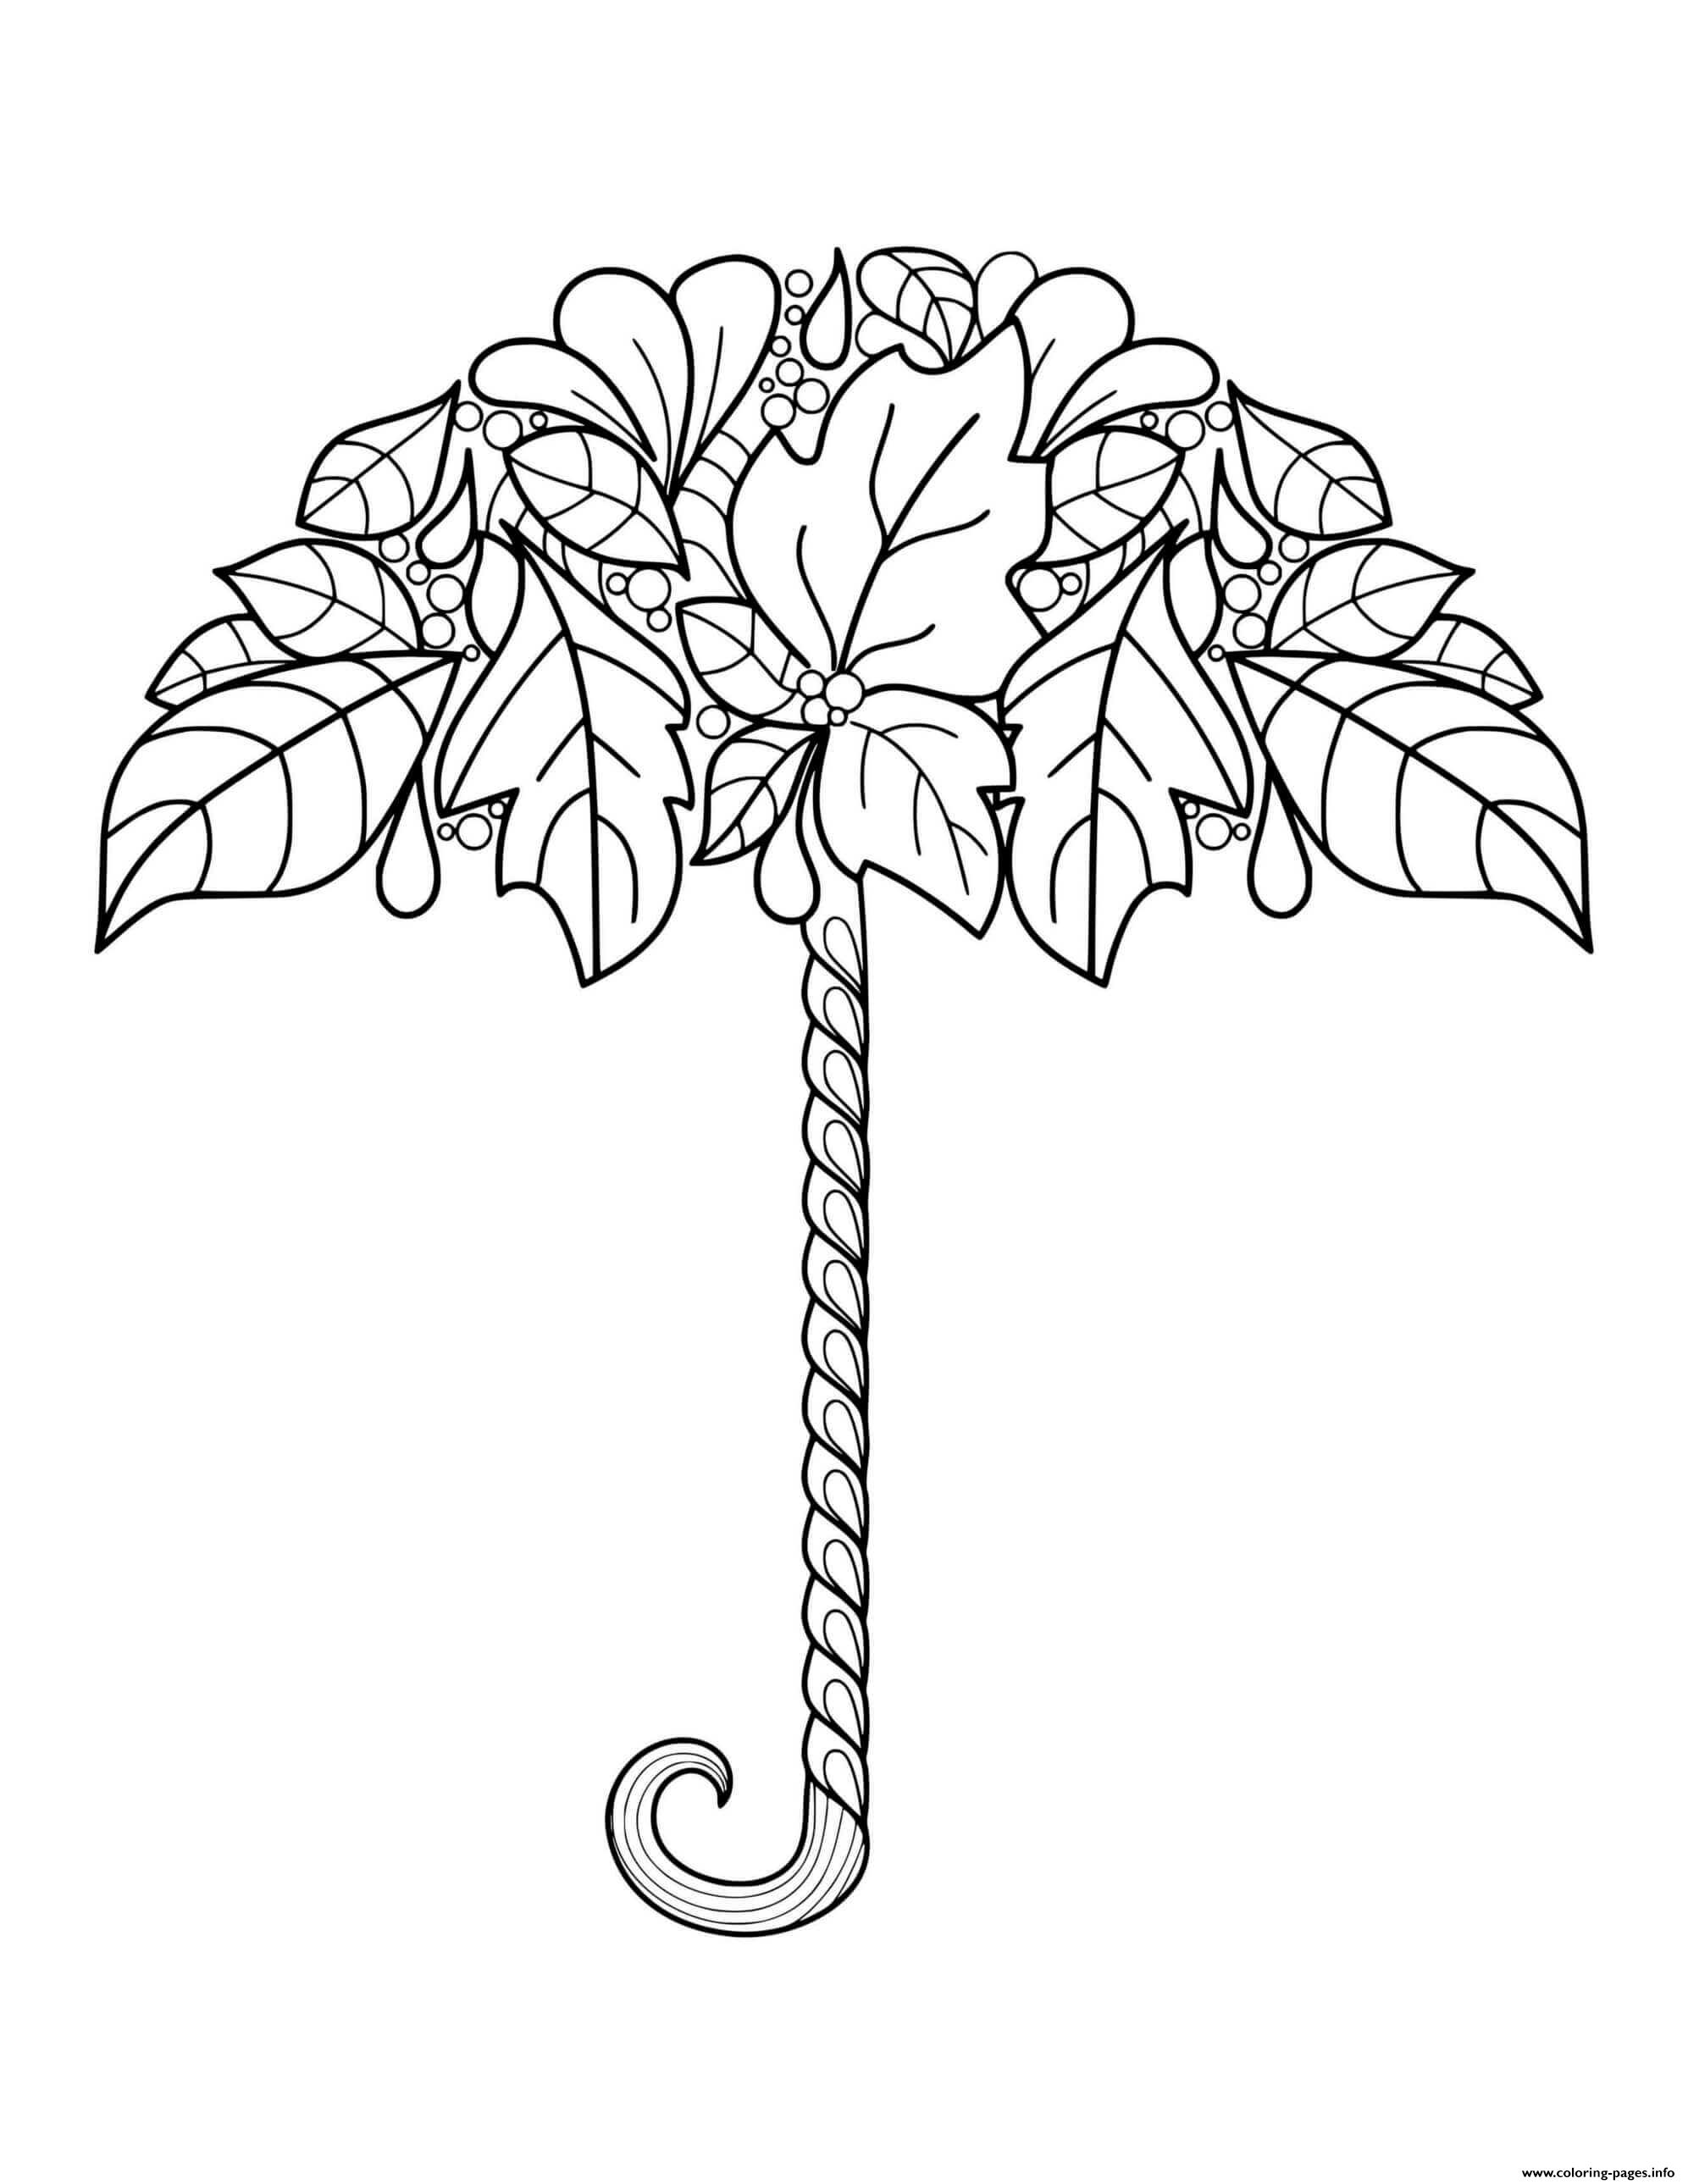 Fall Autumn Leaf Umbrella For Adults Coloring page Printable